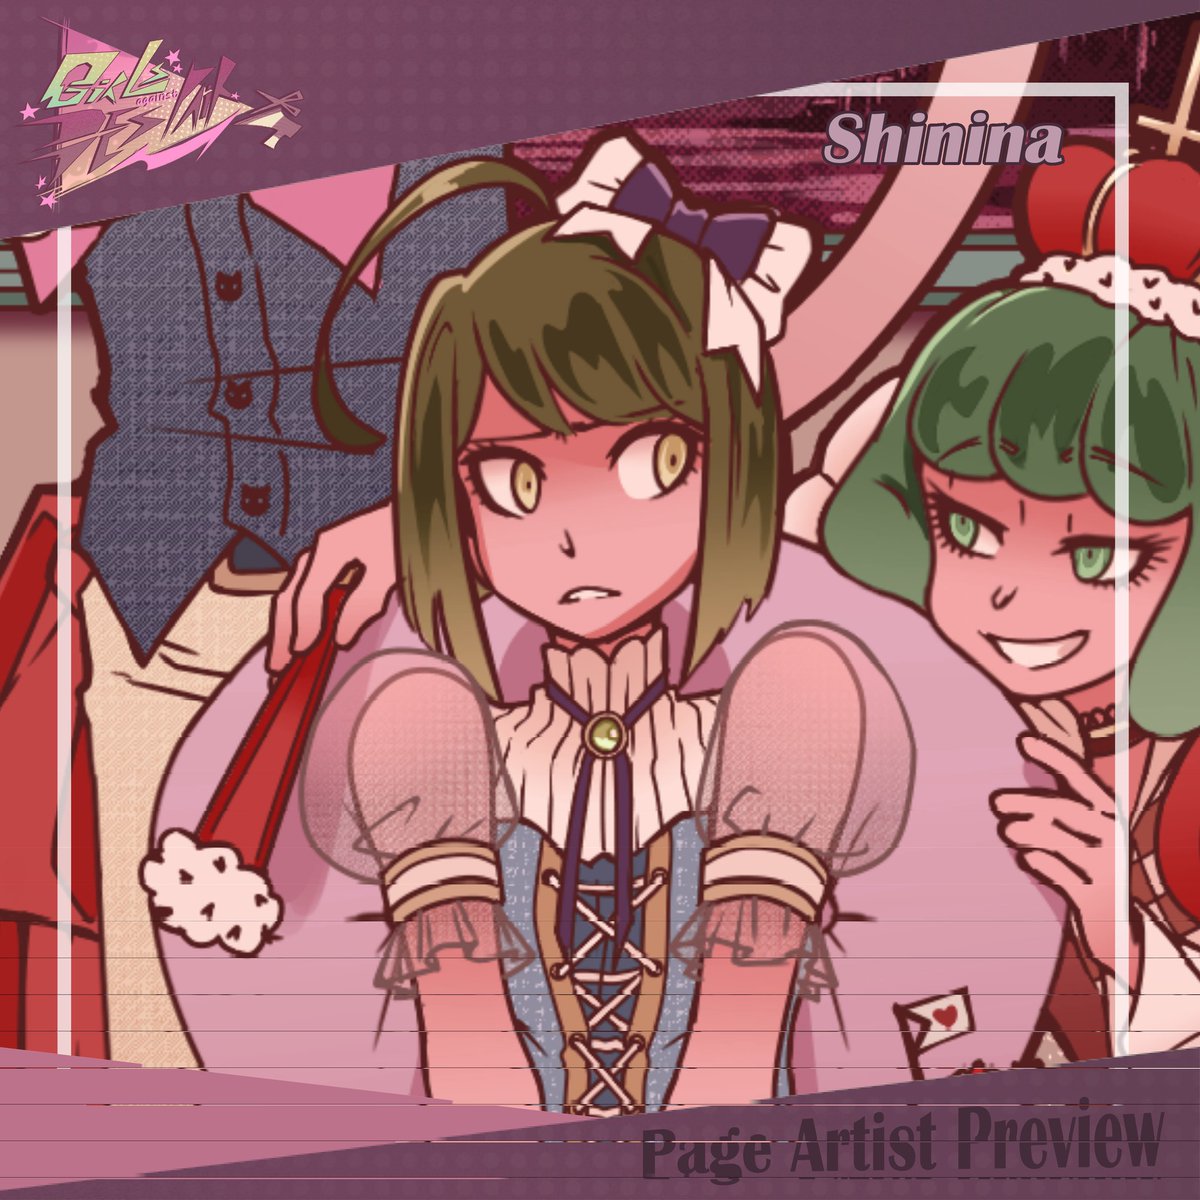 💜Page Preview ✂️  

Special guests: Servant and Monaca make an appearance in this gorgeous fairytale tea party by Shinina! Find the full work by preordering the zine, Link in our bio! 

Preorders close on April 17th!